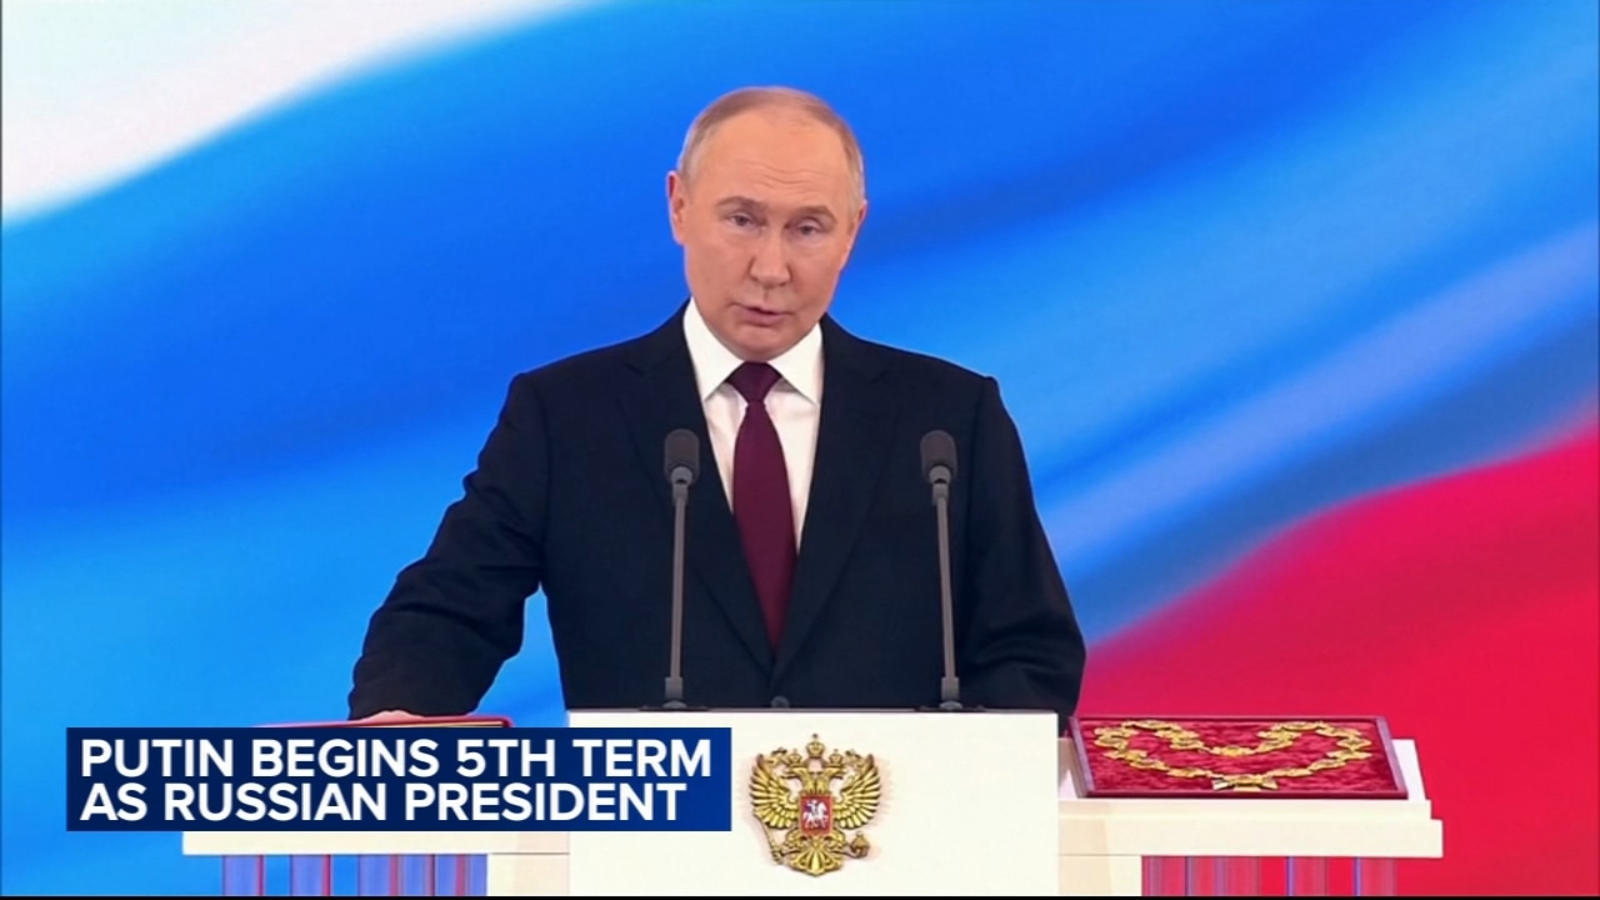 Vladimir Putin begins 5th term as president, embarking on another 6 years as leader of Russia [Video]